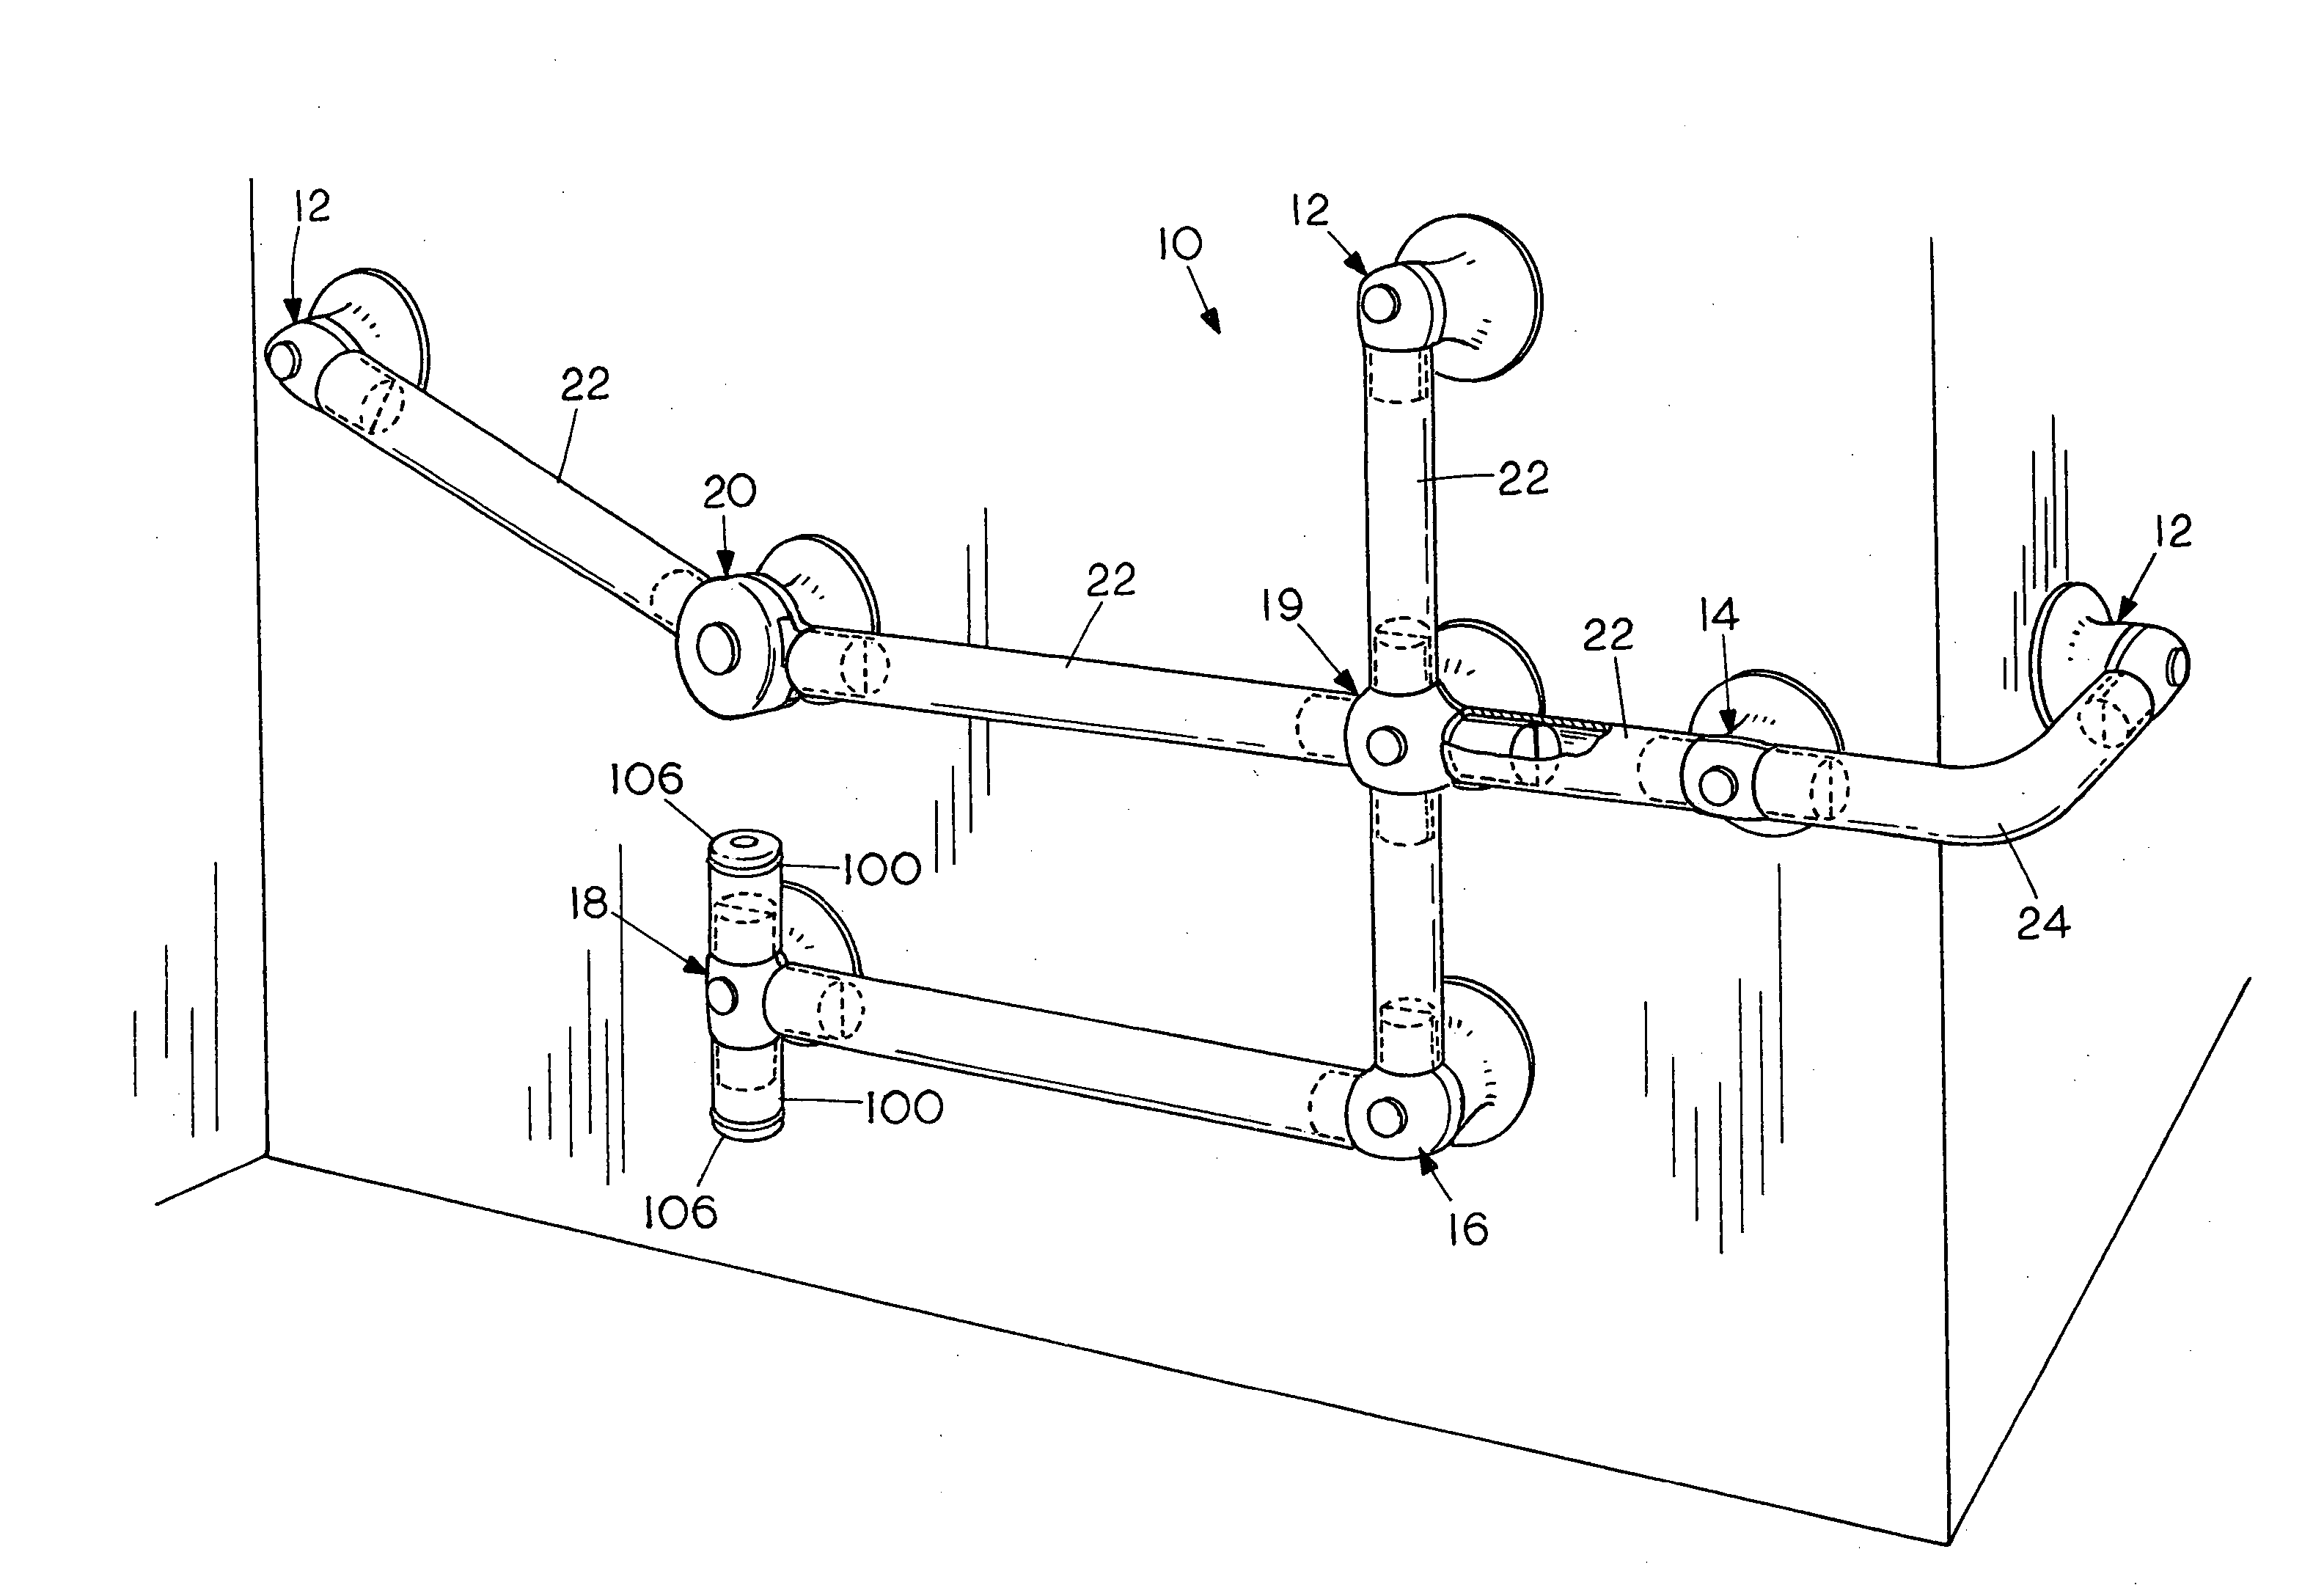 Reinforced supporting connectors for tubular grab railings